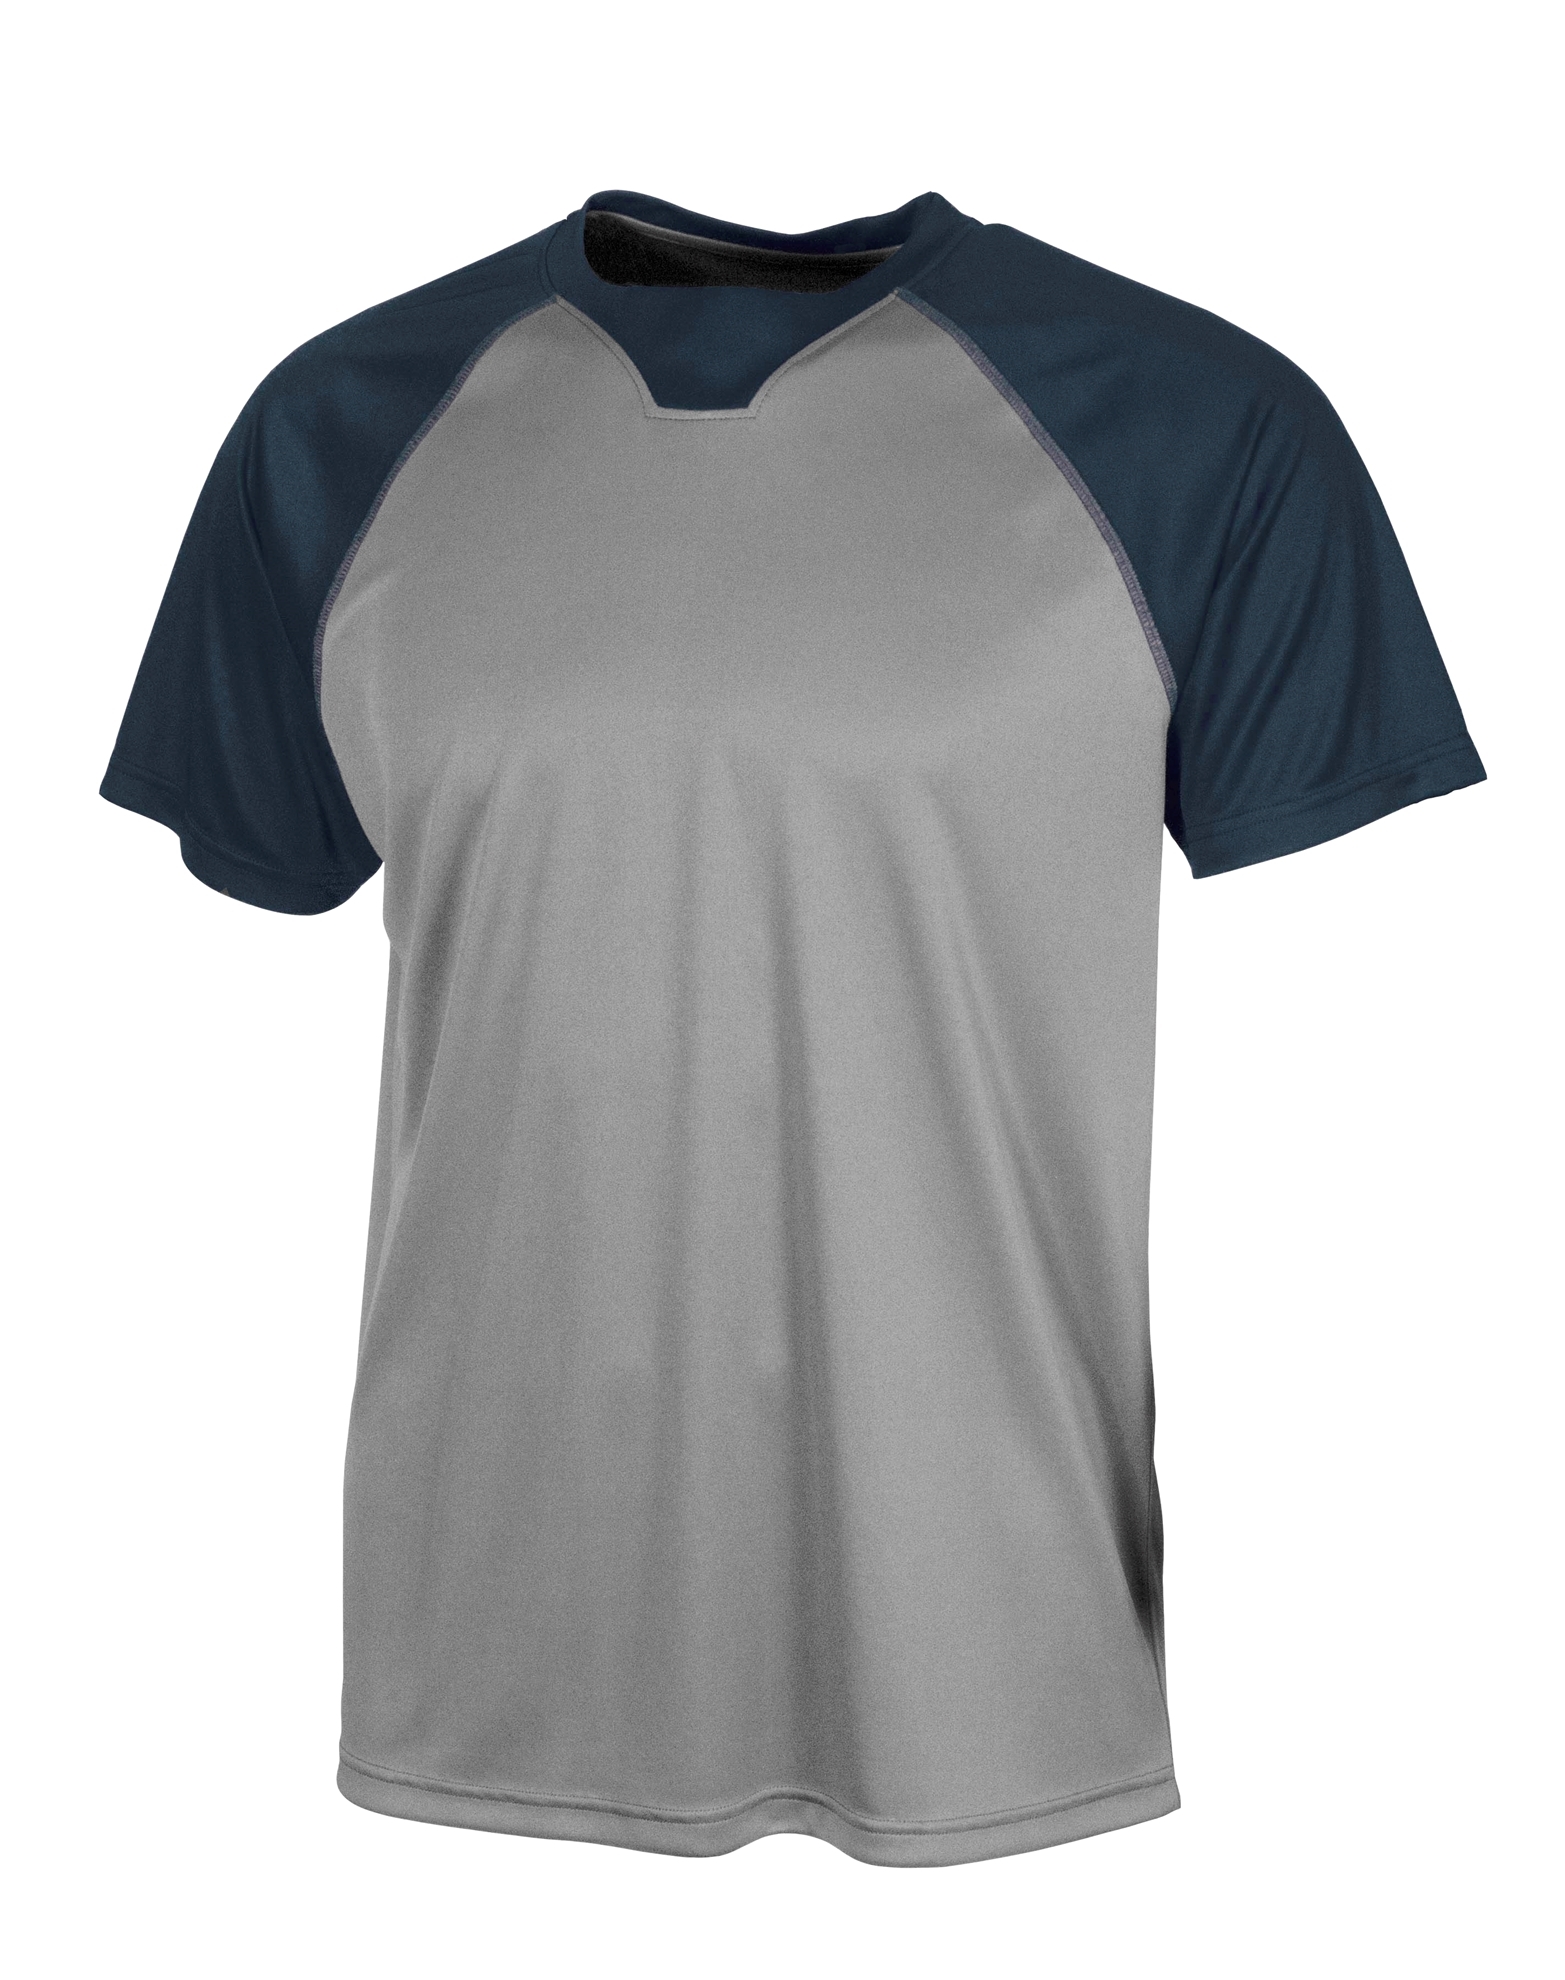 click to view CHARCOAL/NAVY